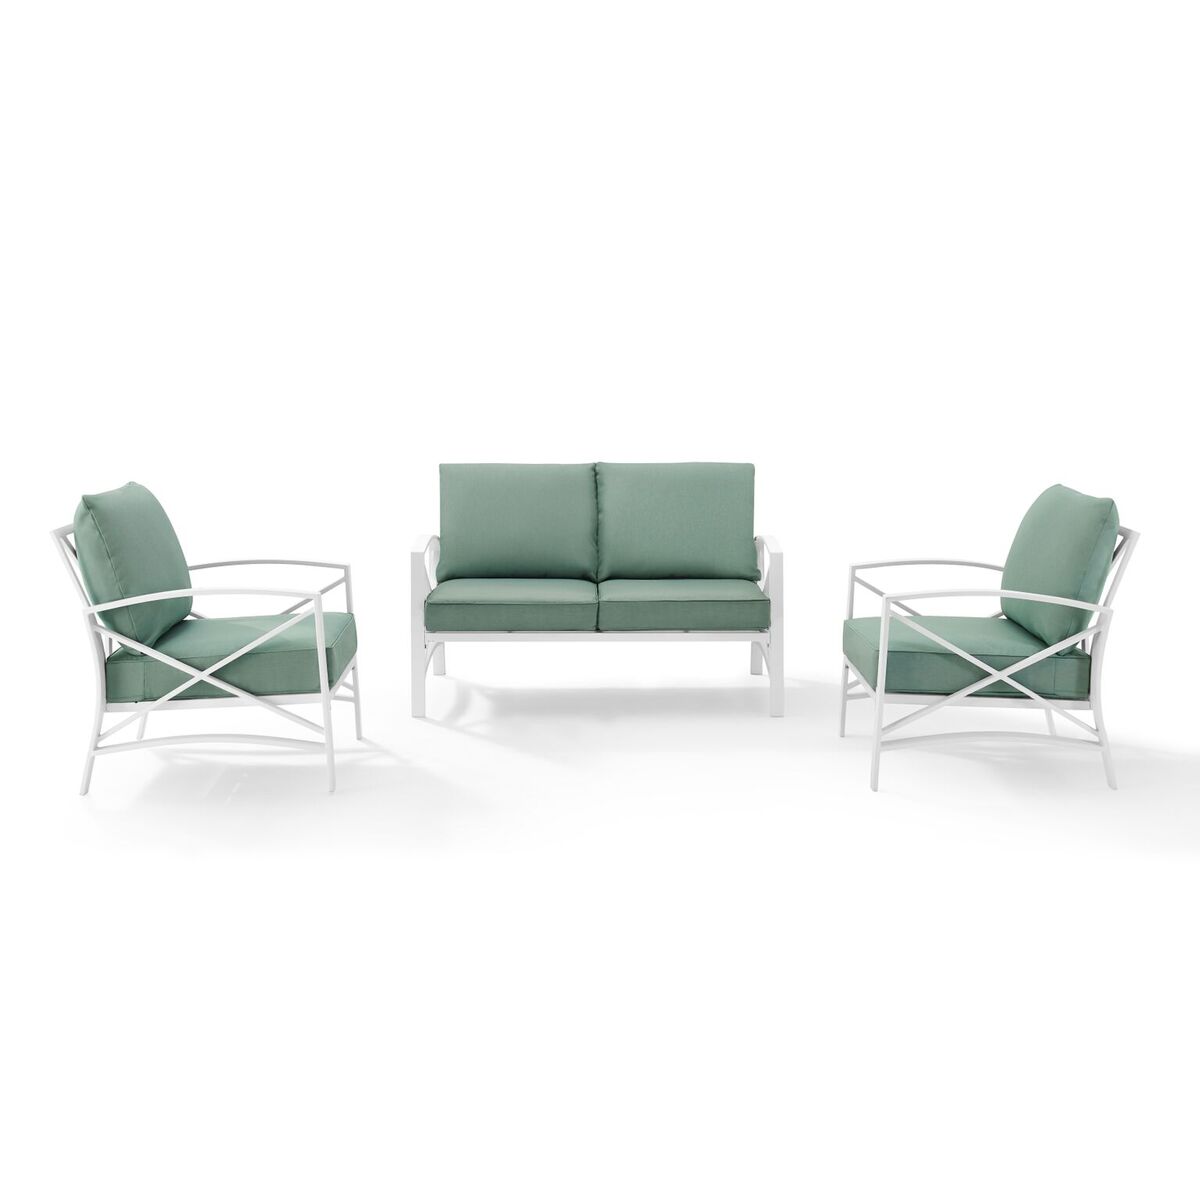 Ko60011wh-mi Kaplan 3-piece Outdoor Seating Set In White With Mist Cushions